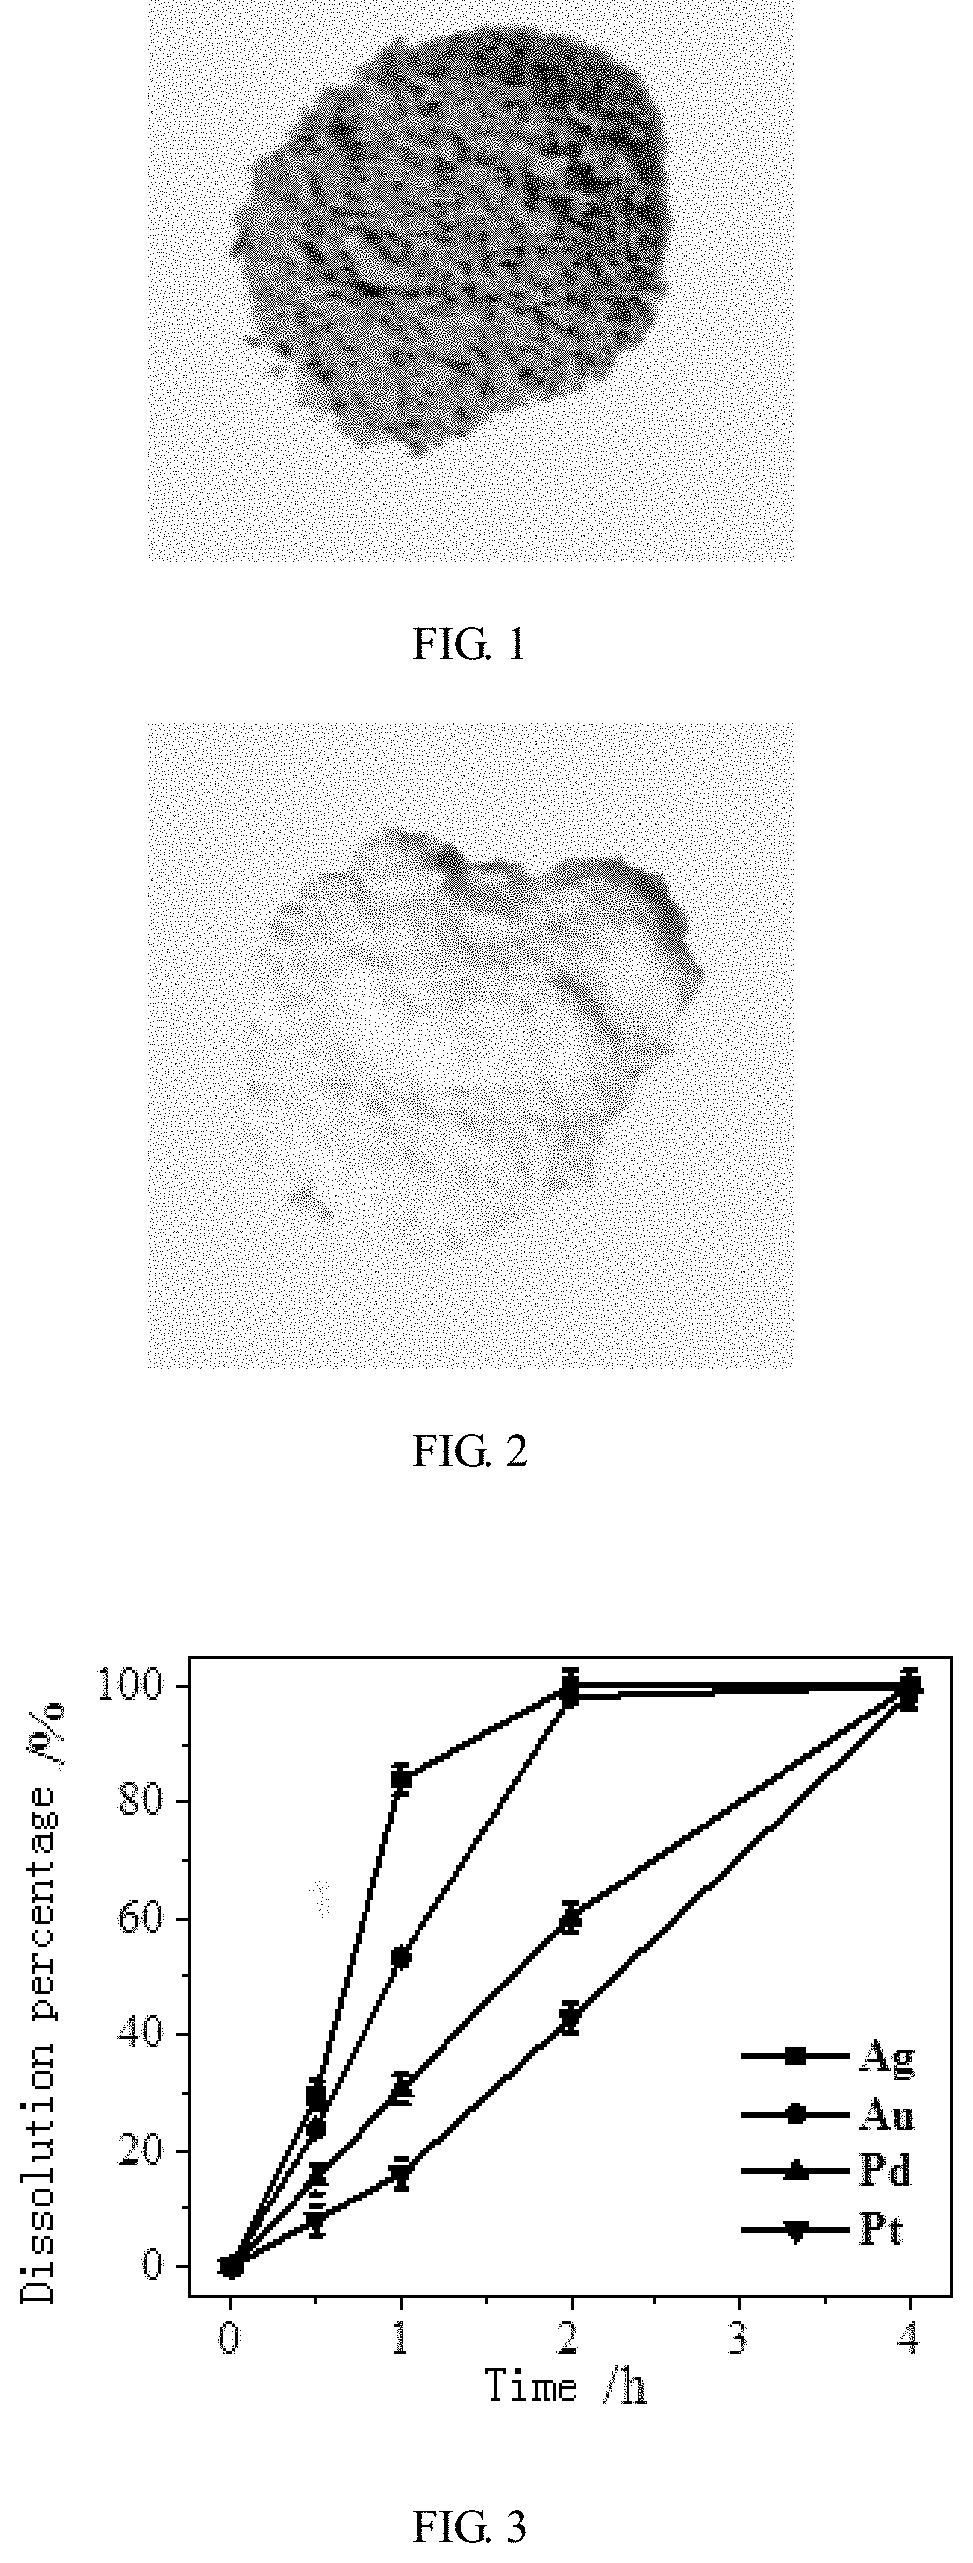 Method for dissolving metals by photocatalysis